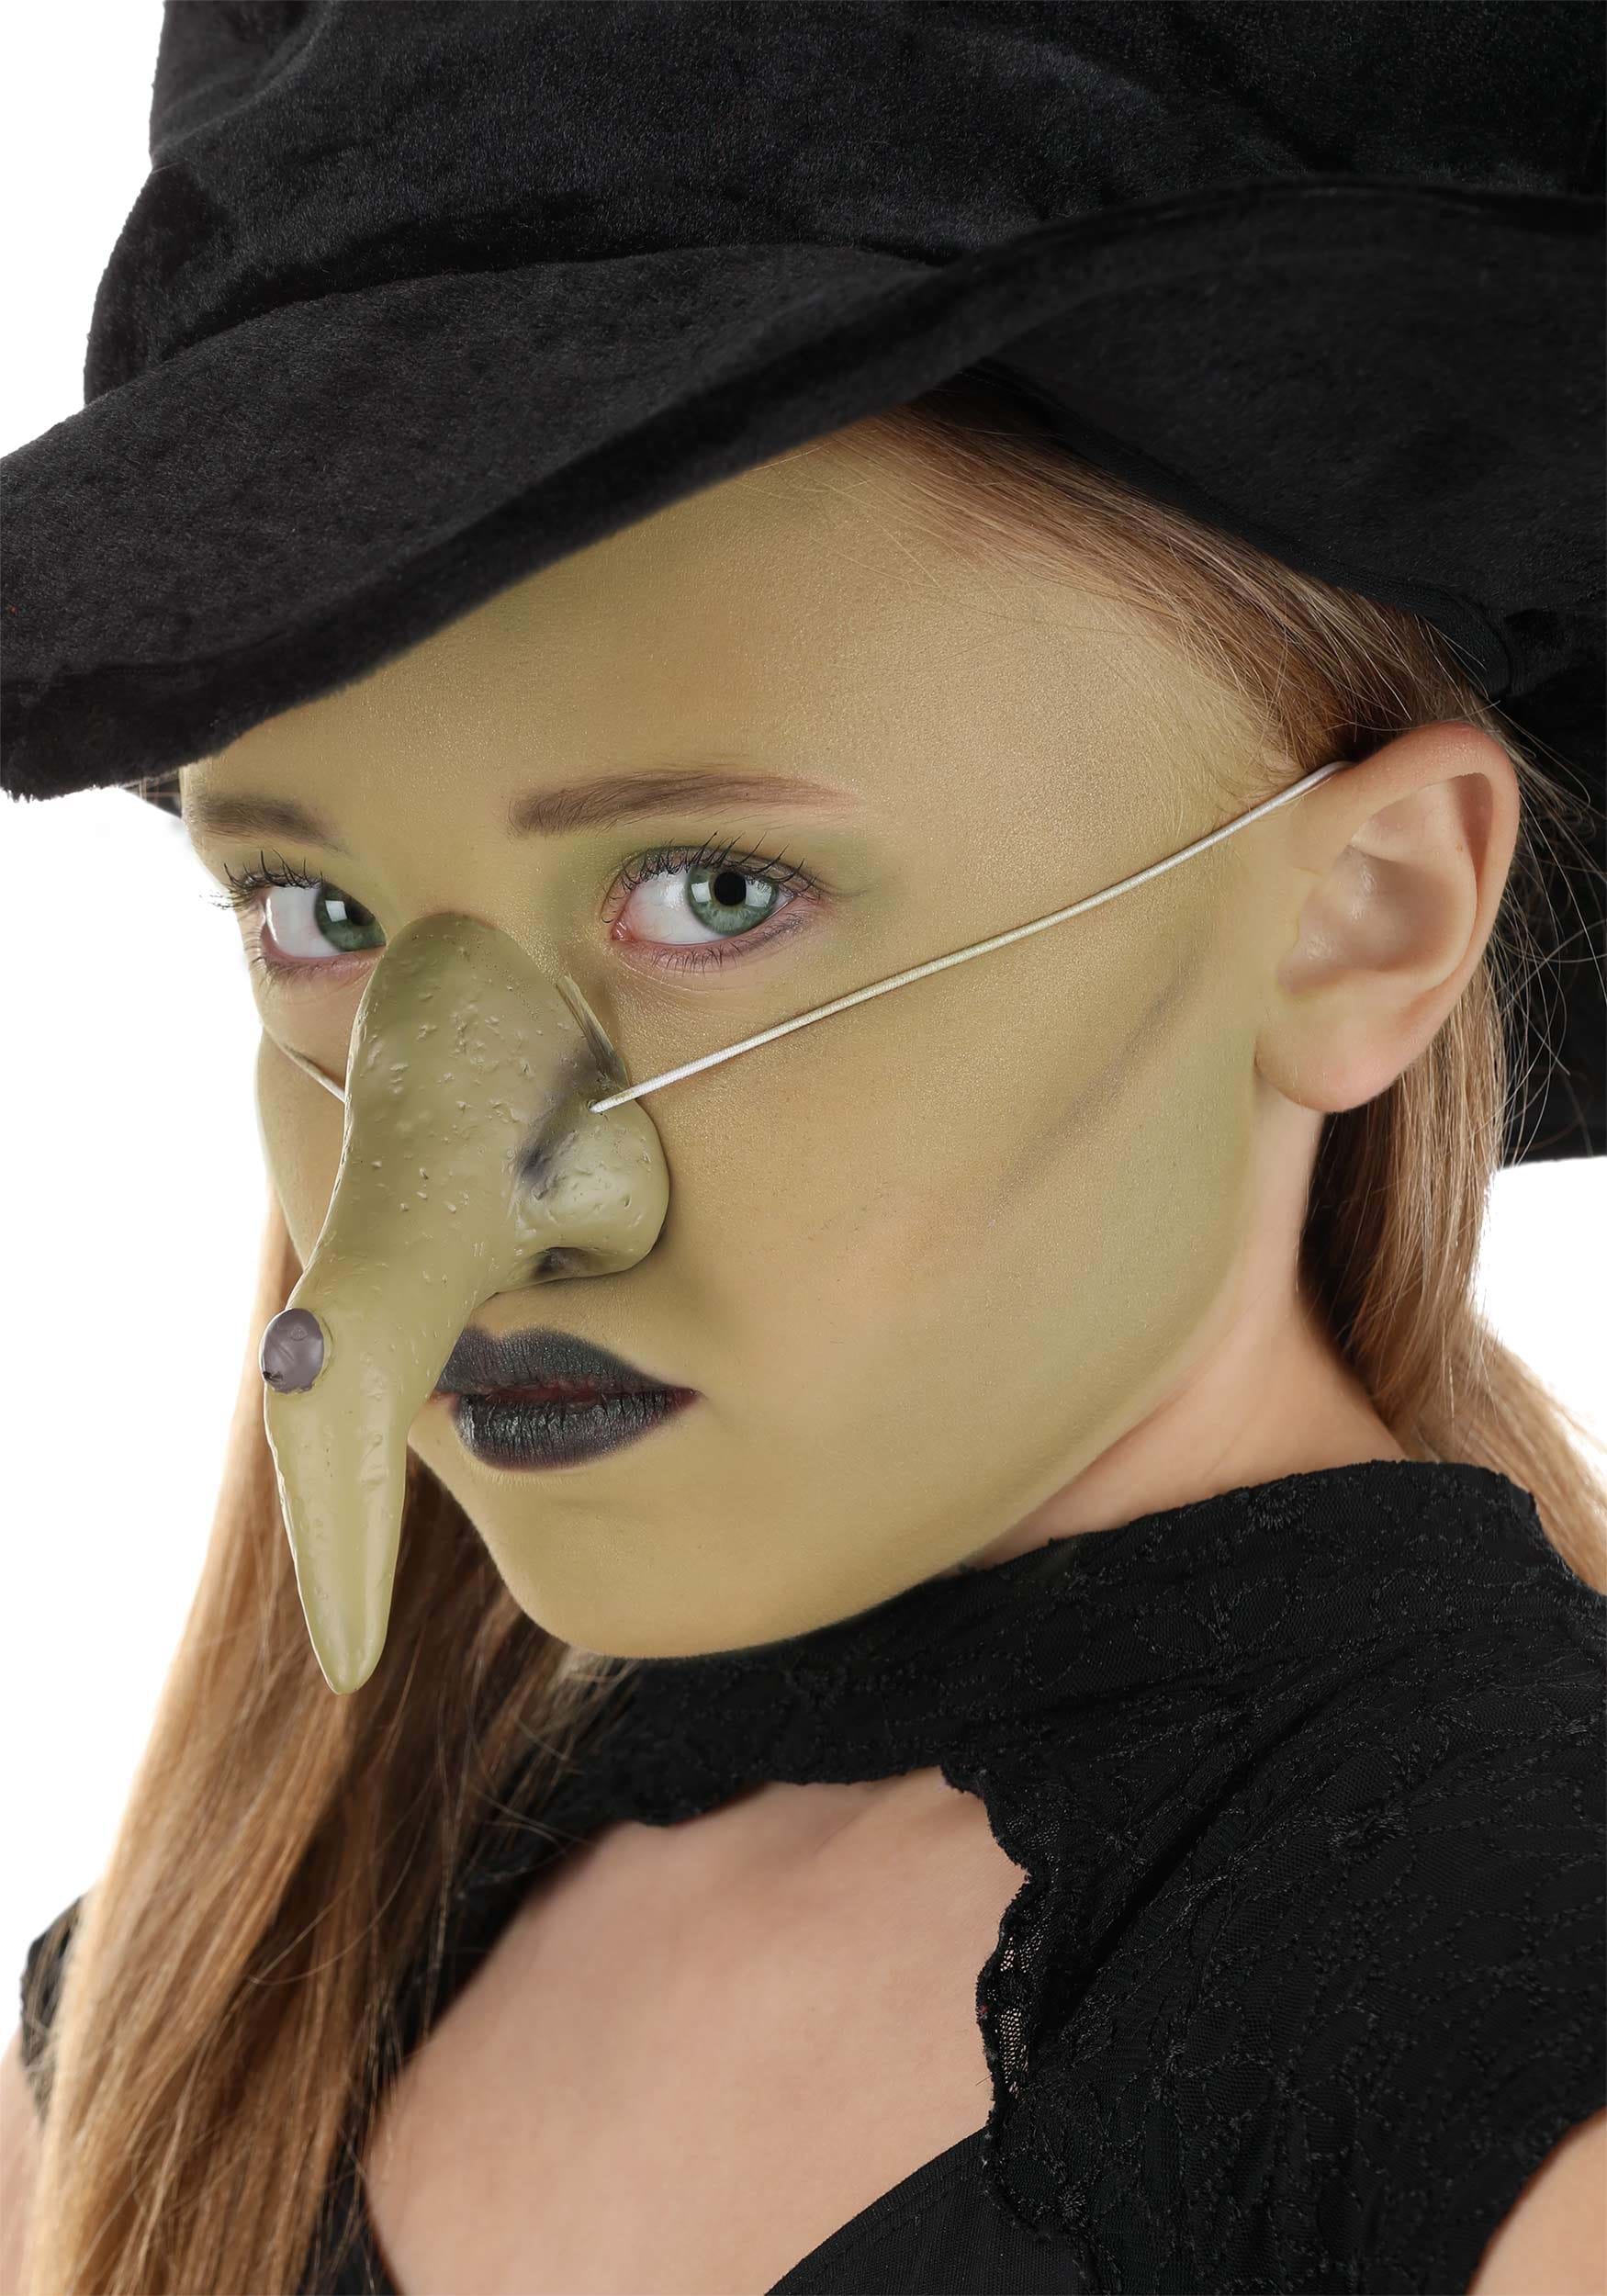 https://images.halloweencostumes.com/products/79836/1-1/witch-nose.jpg